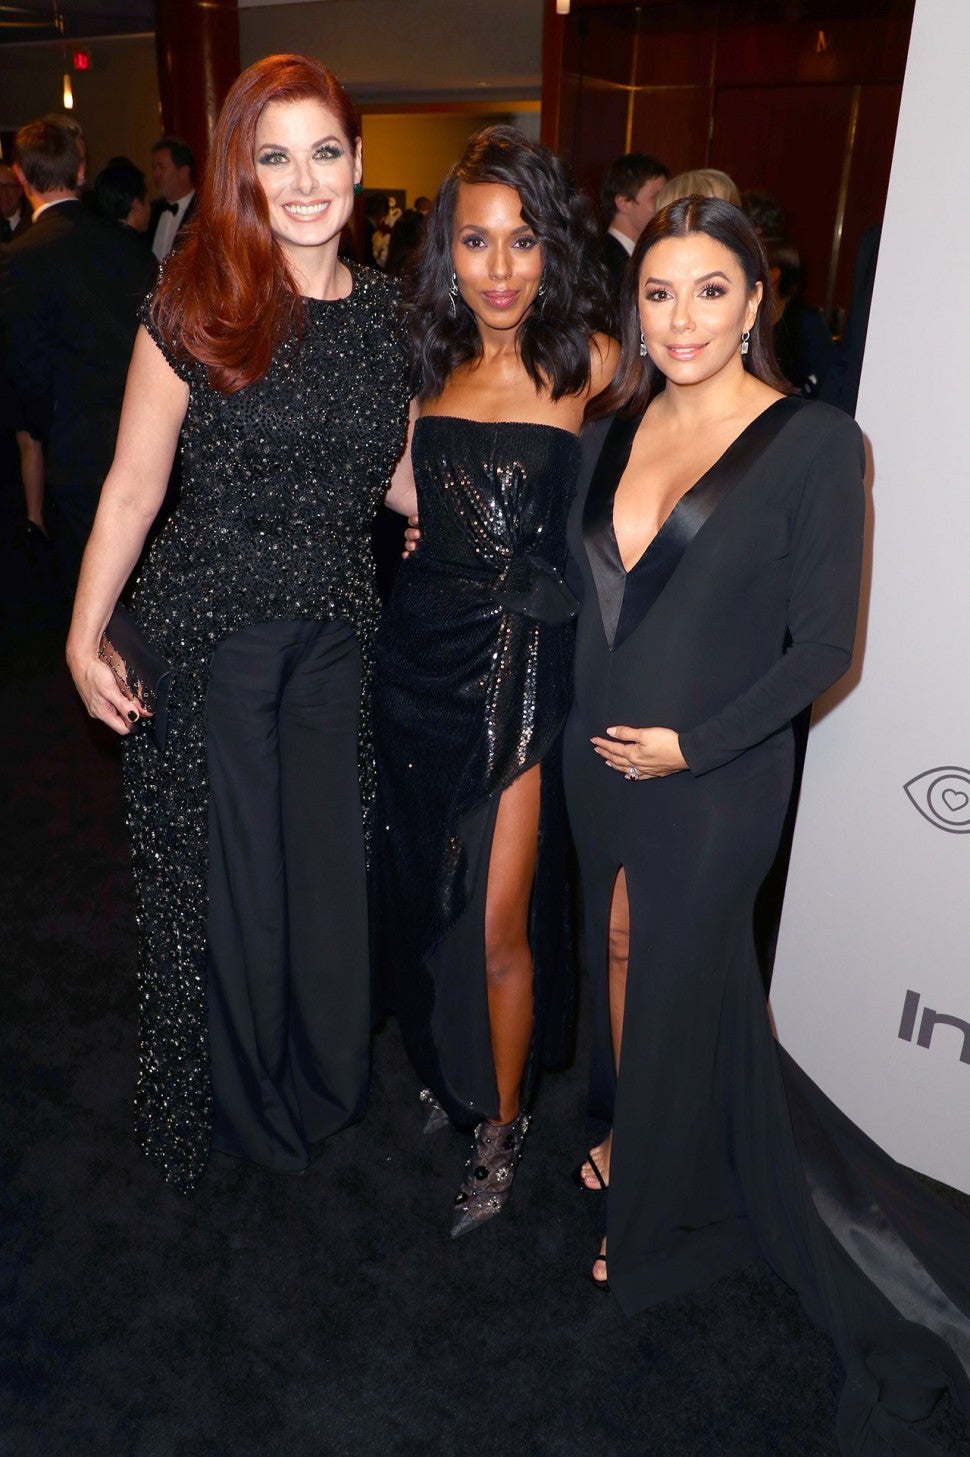 Debra Messing, Kerry Washington and Eva Longoria attend the 2018 InStyle and Warner Bros. 75th Annual Golden Globe Awards Post-Party